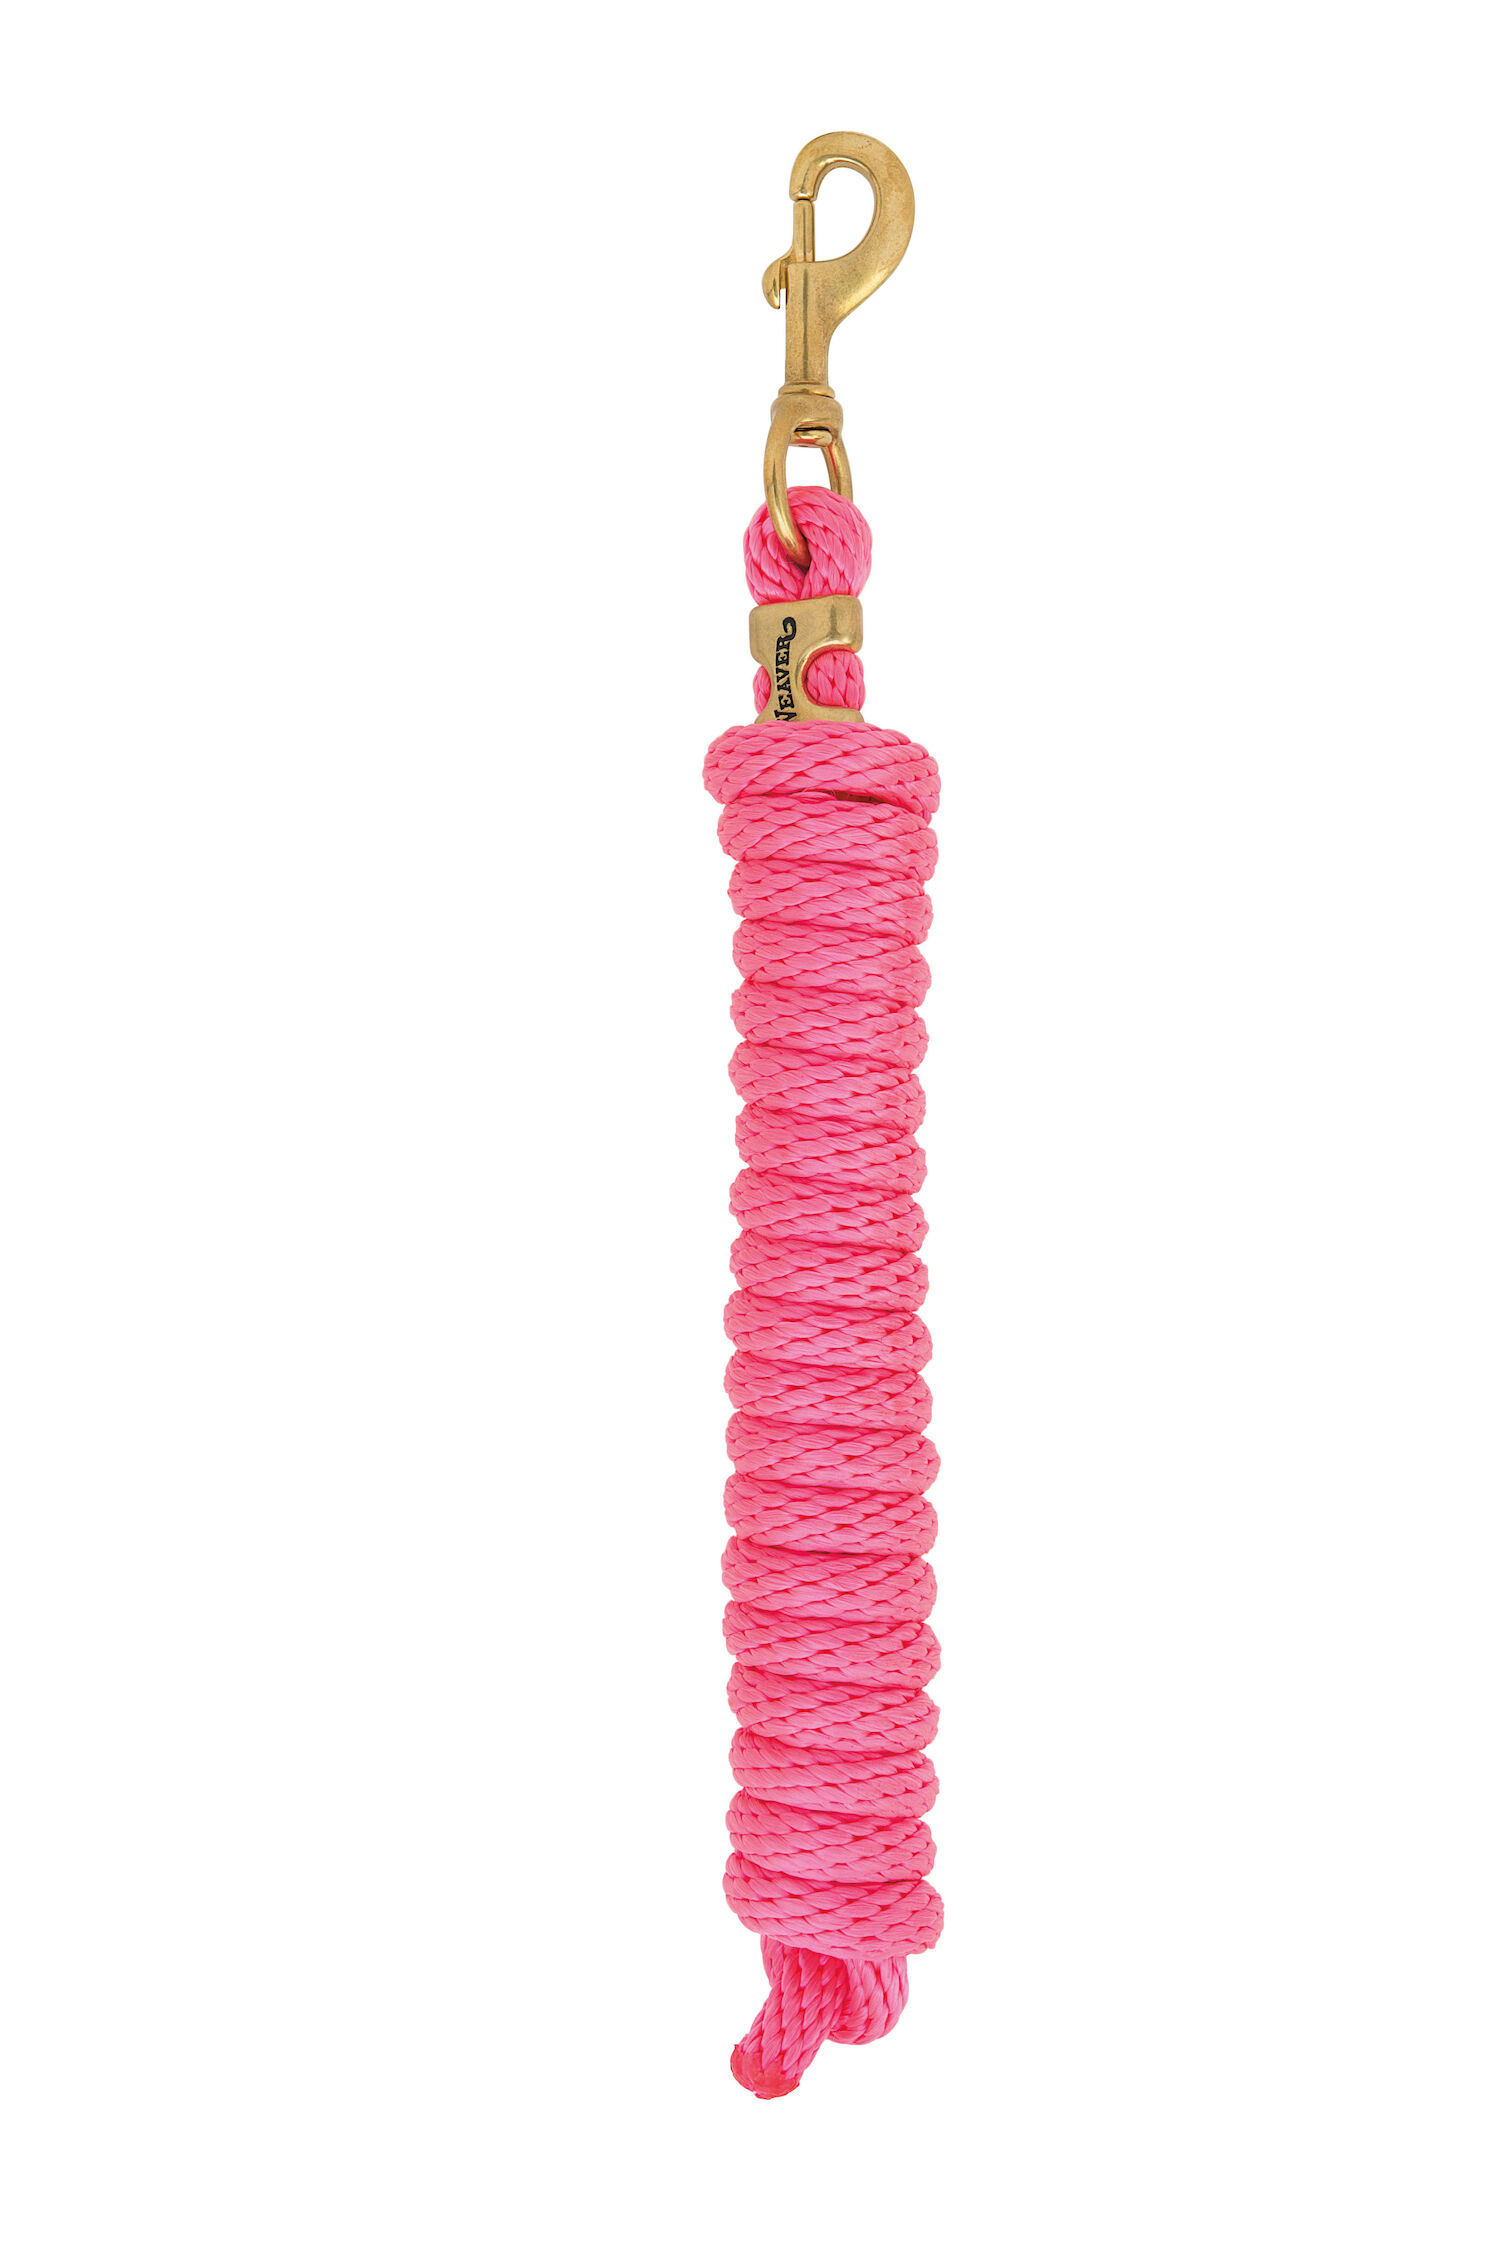 10 DIVA PINK  POLY LEAD ROPE